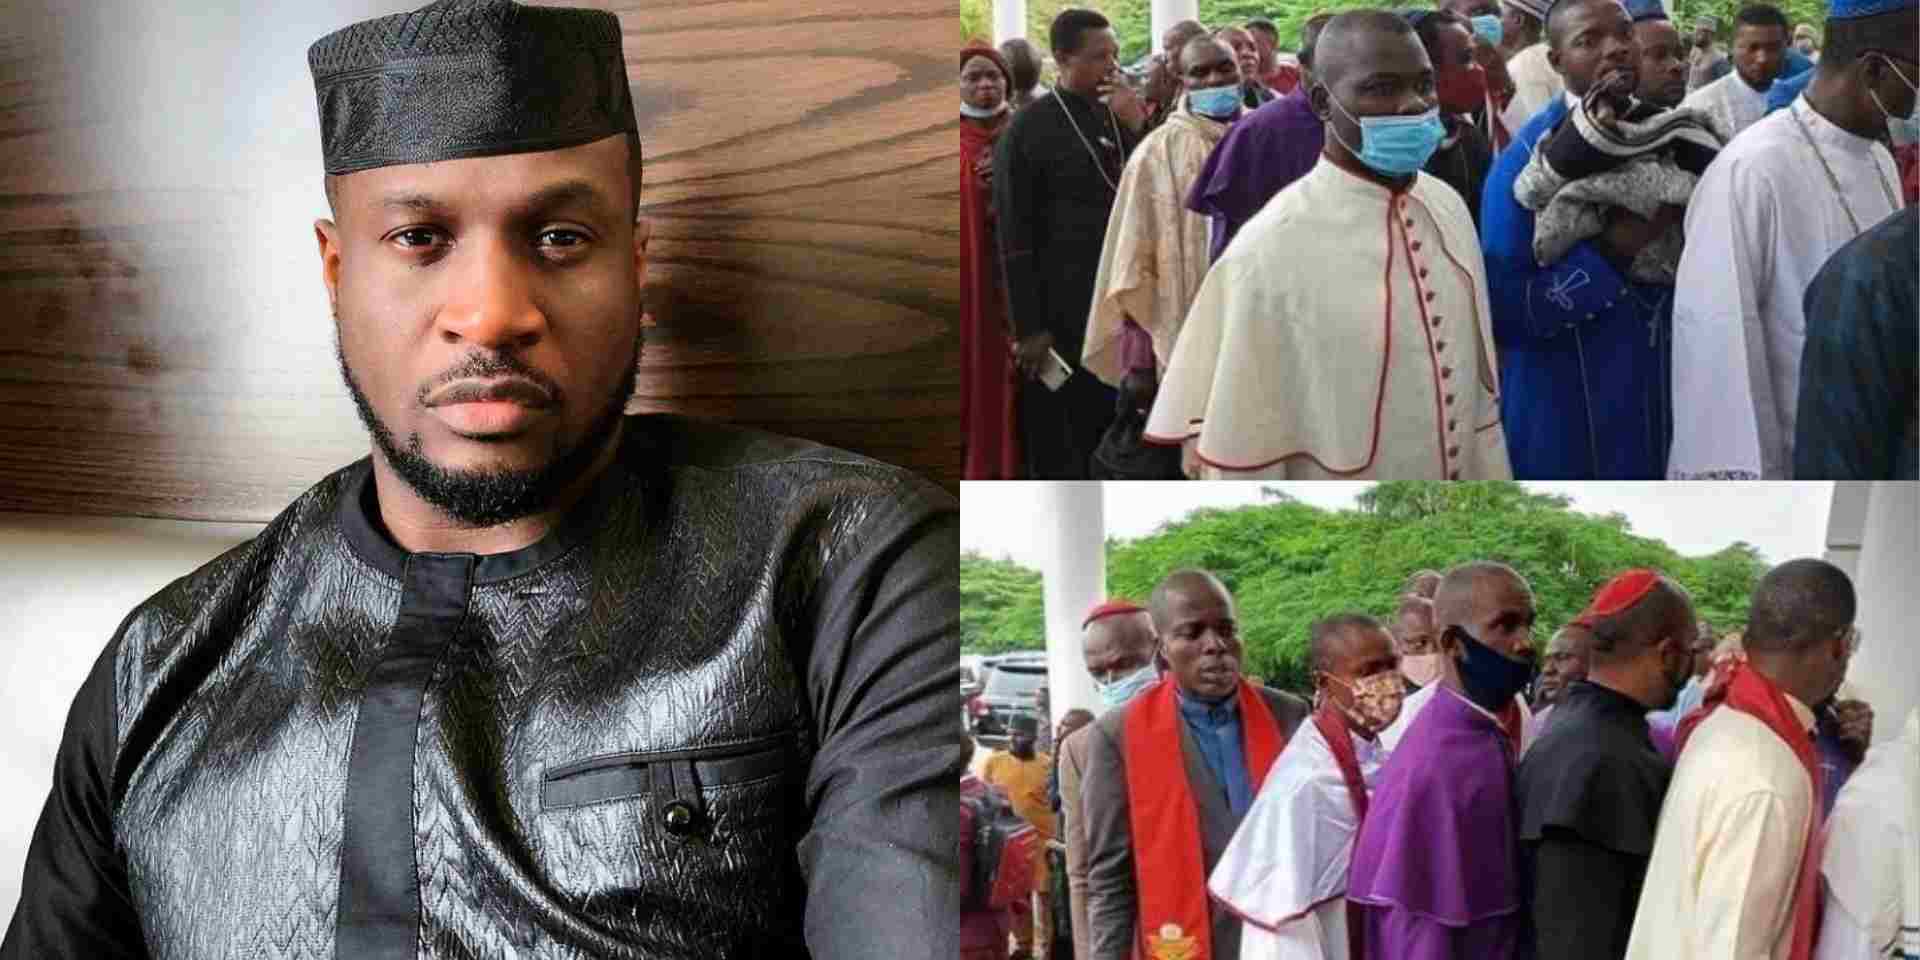 "I fit dey my house one day, see Psquare dey perform for stage" - Peter Okoye reacts to the fake bishops saga